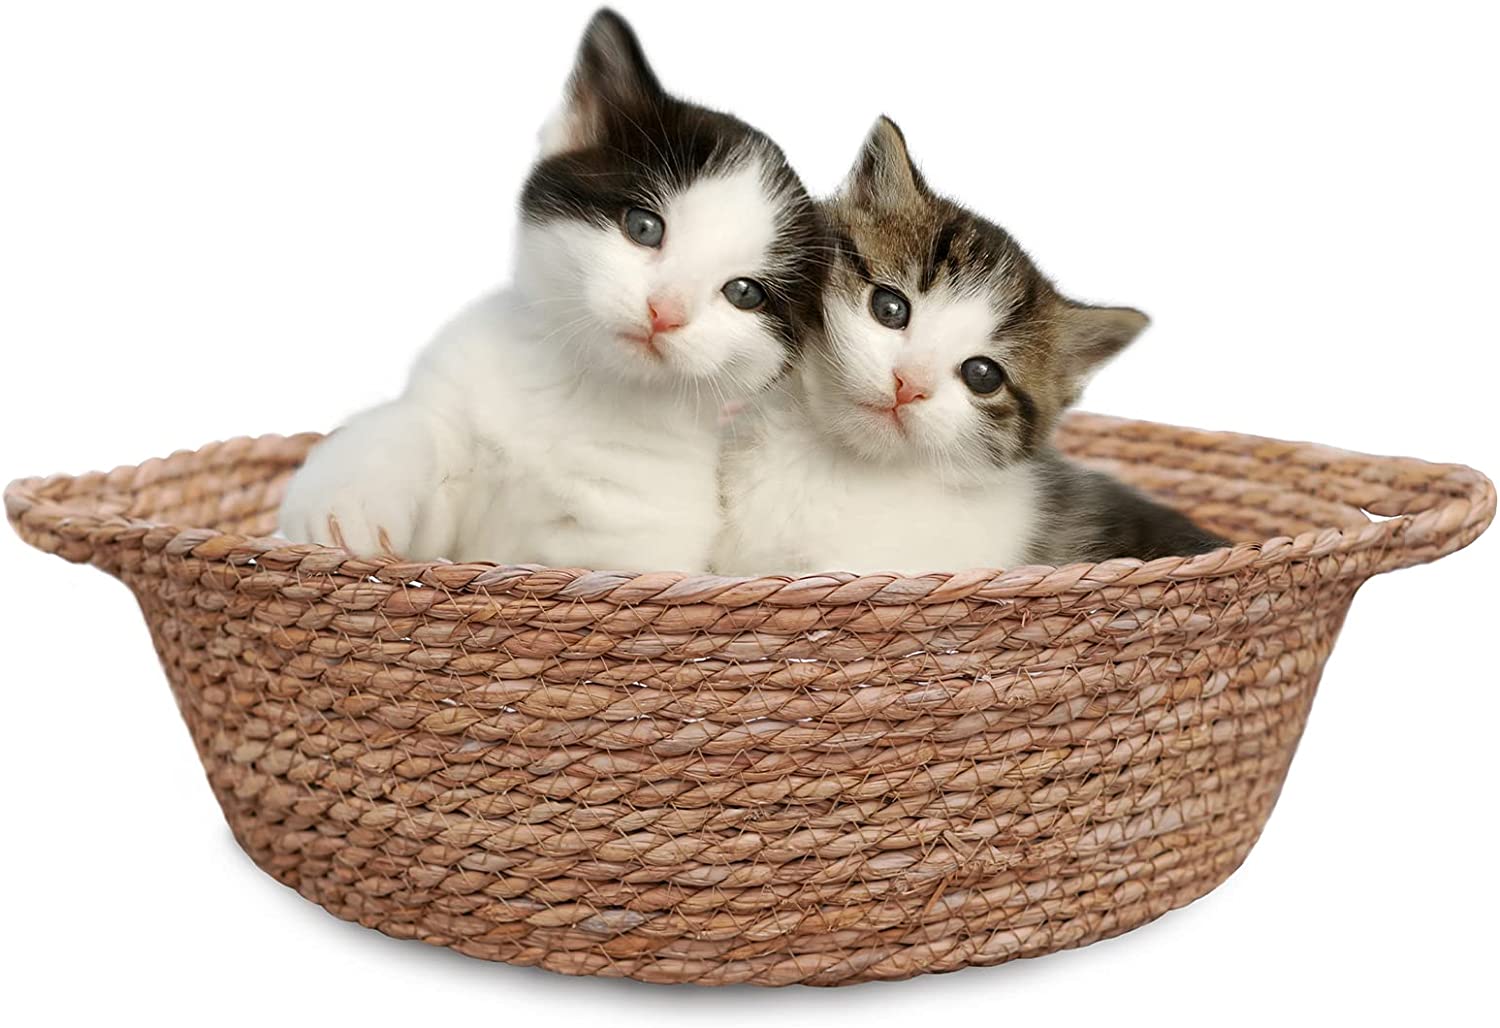 MewMewLand Natural Cat Wicker Bed Basket, Handmade Braided Cattail Leaf Kitten Bed with Soft Cushion Small